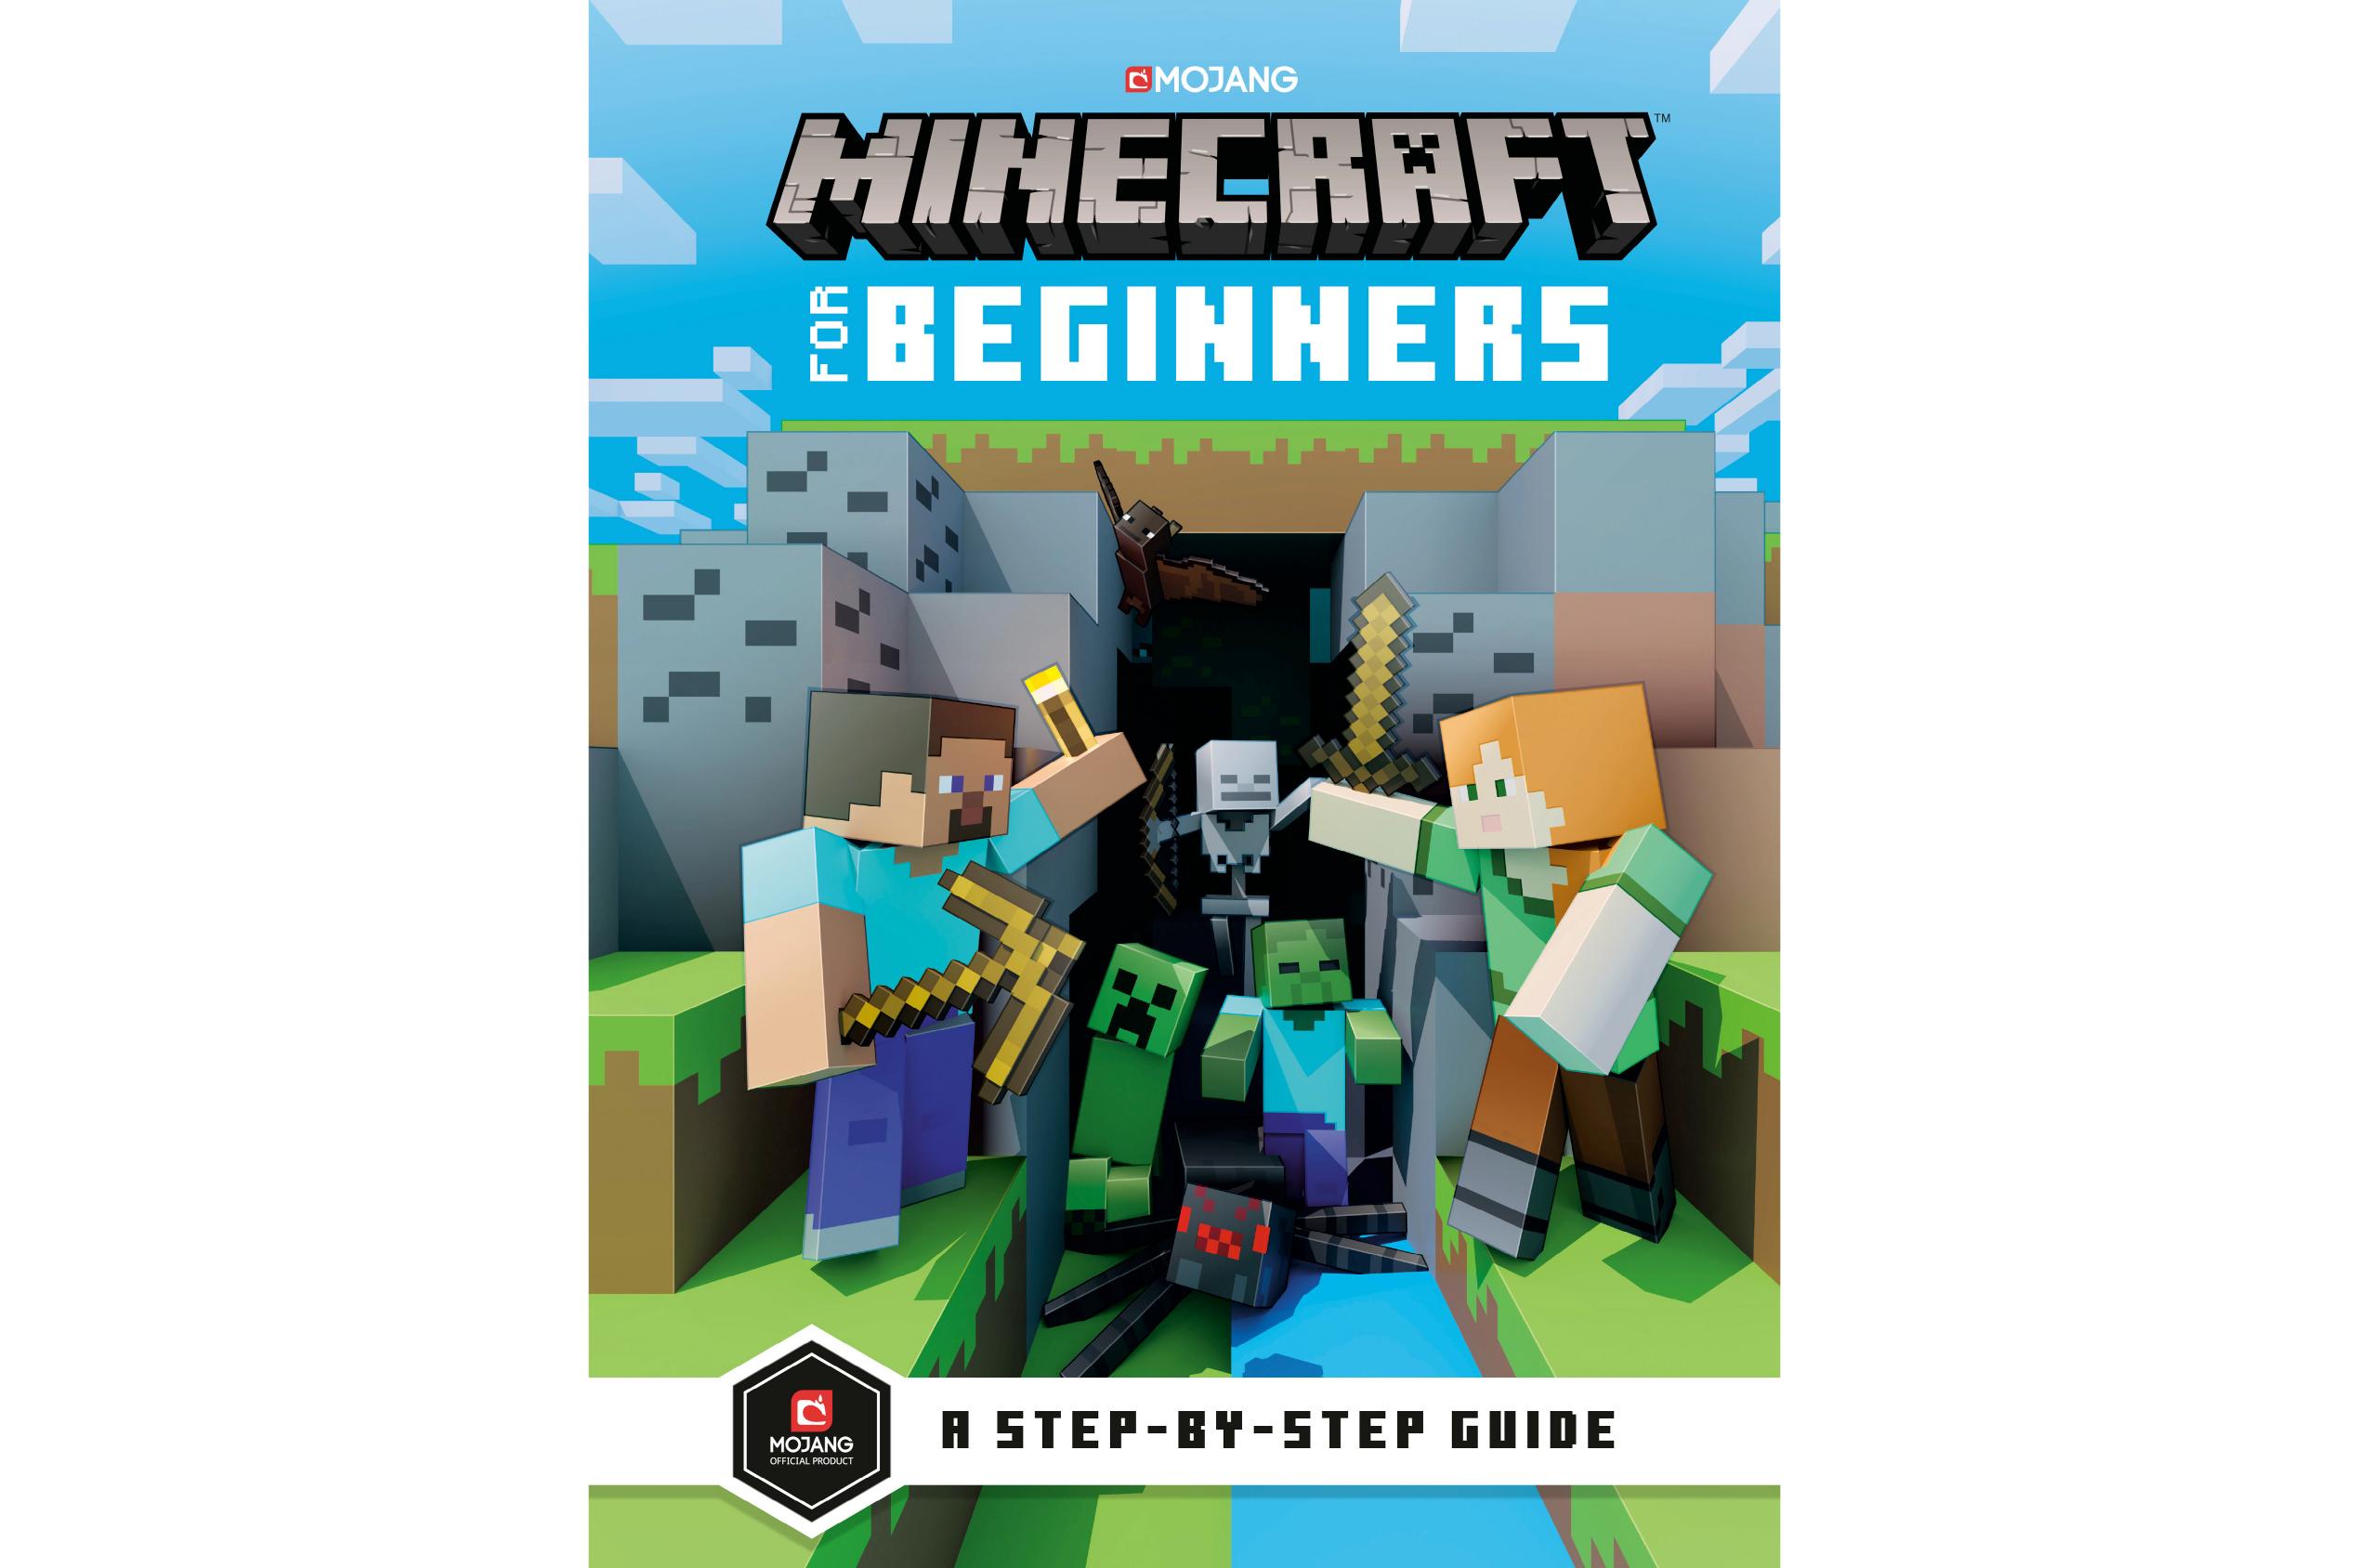 Minecraft for Beginners by Mojang AB and The Official Minecraft Team